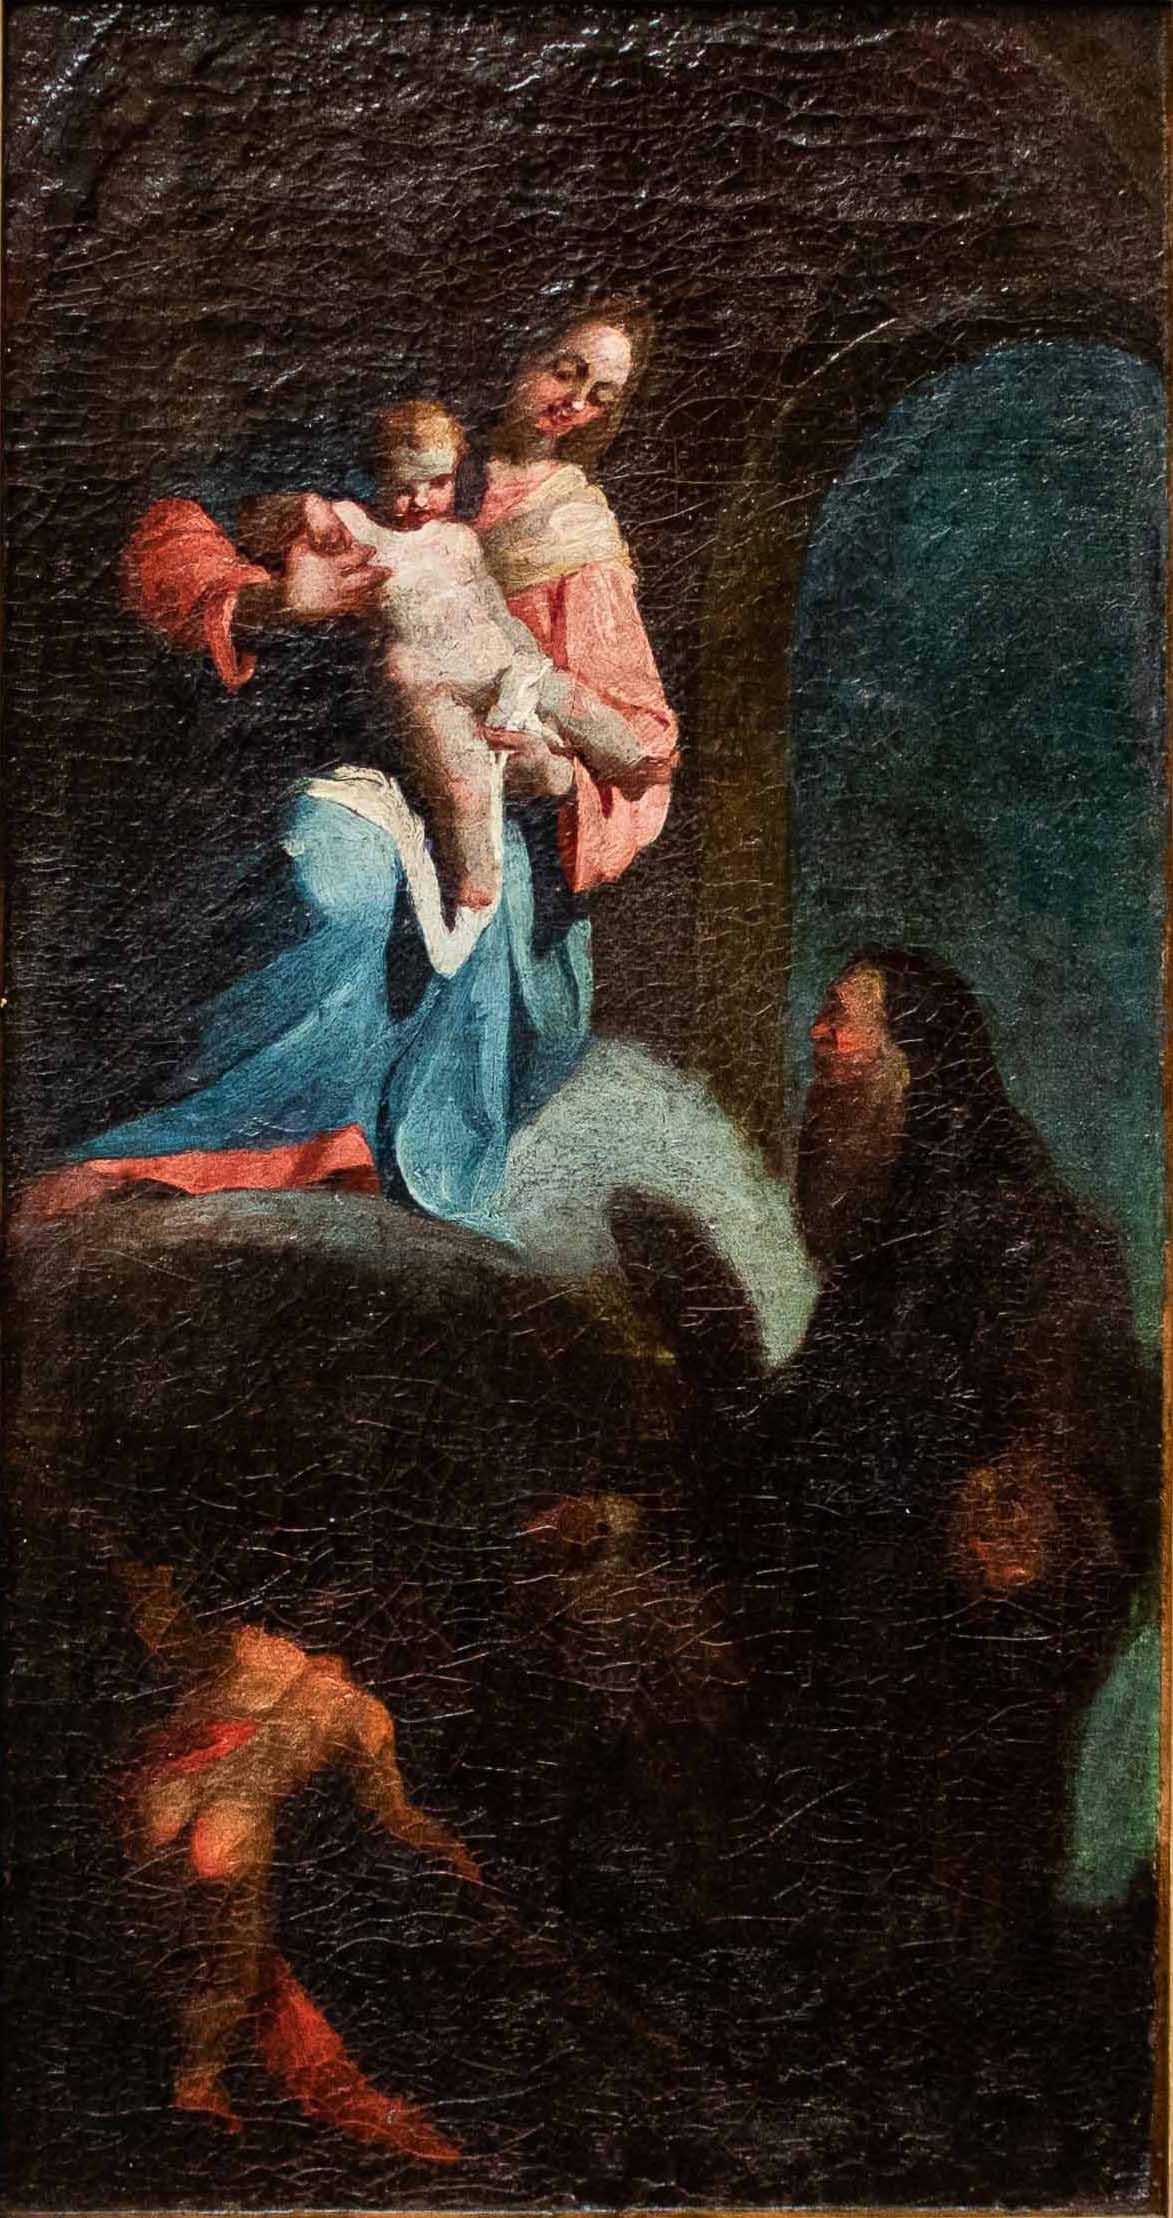 Italian 18th Century Madonna with Child Adored by Two Saints Paintings Oil on Canvas For Sale